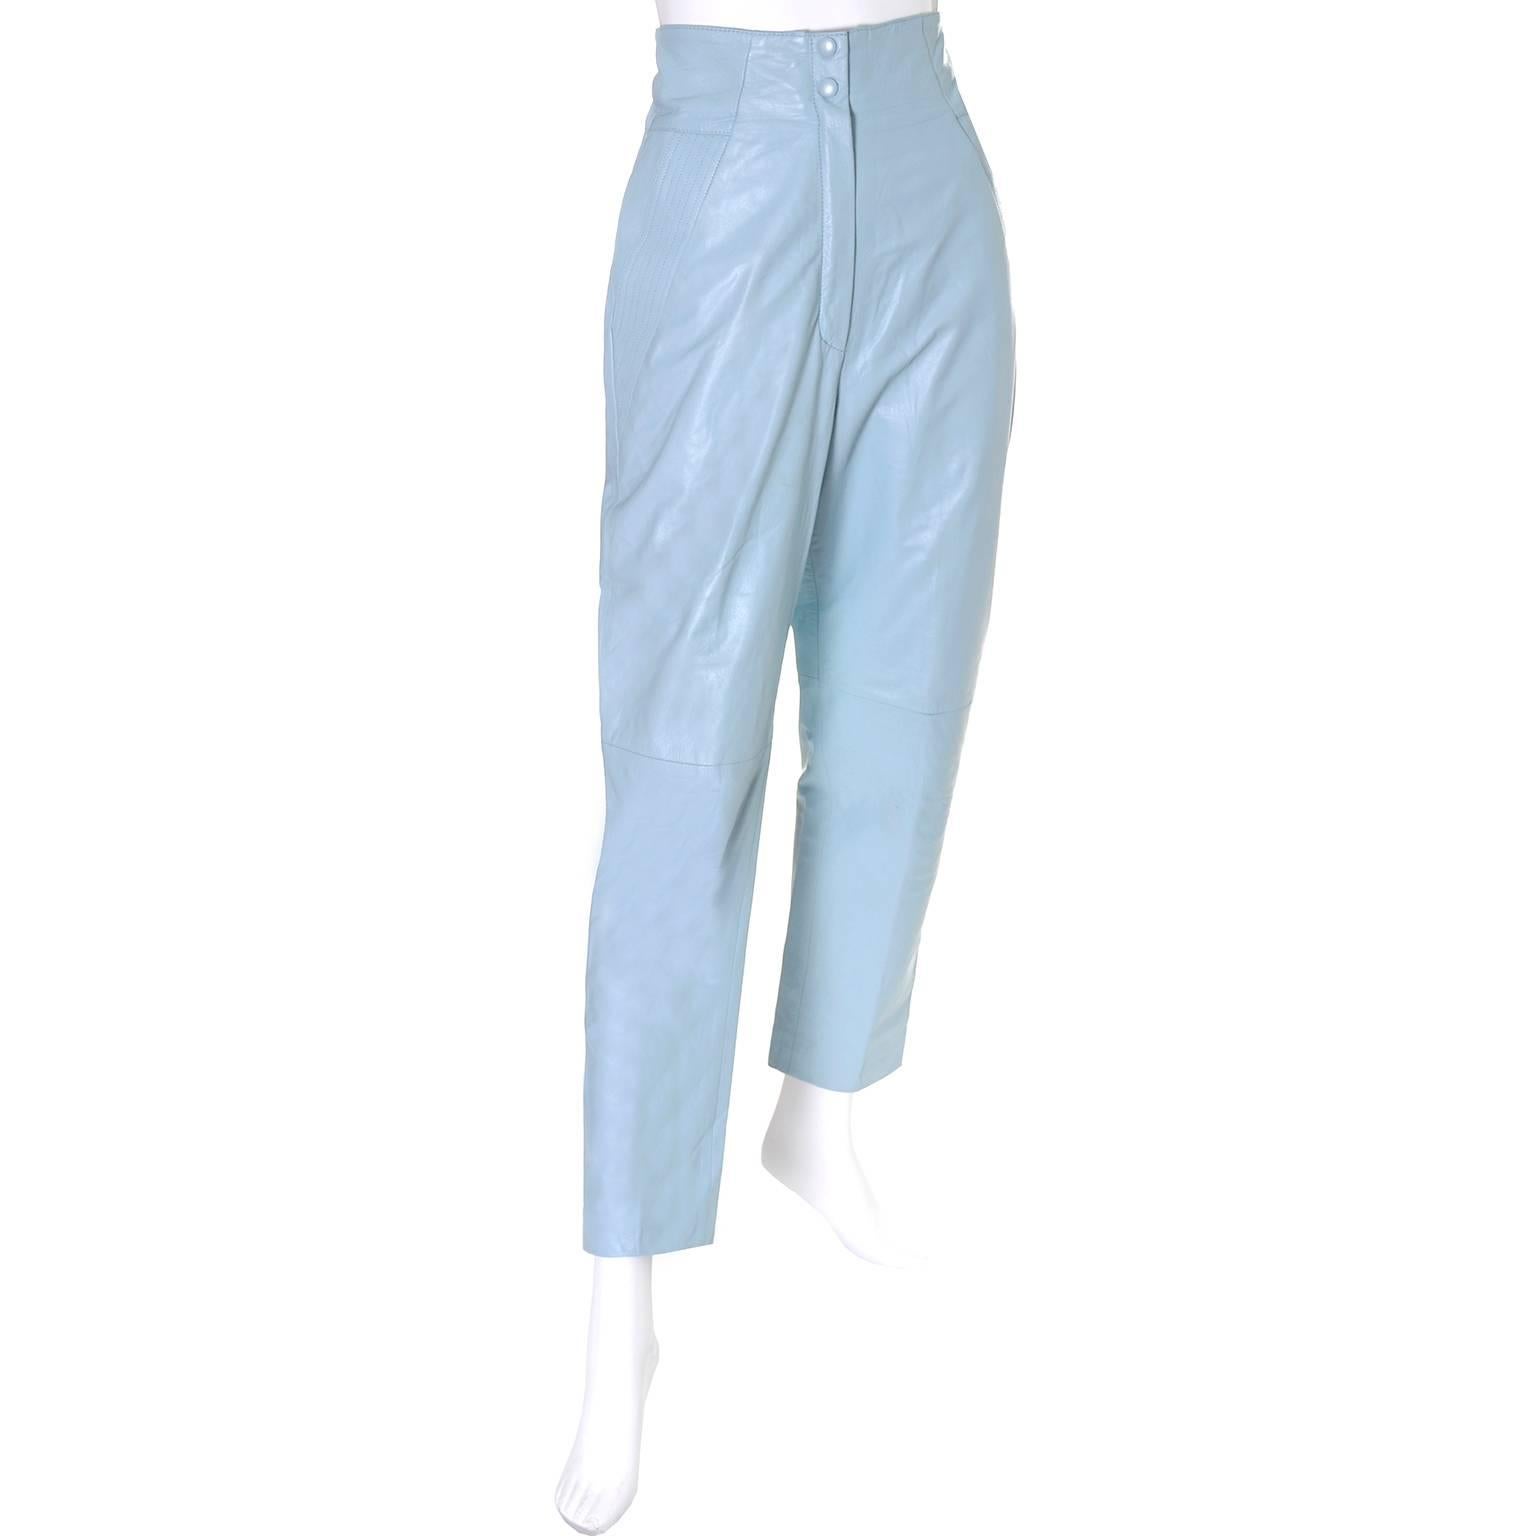 Women's 1980s Lillie Rubin Vintage High Waisted Blue Leather Pants Size 10